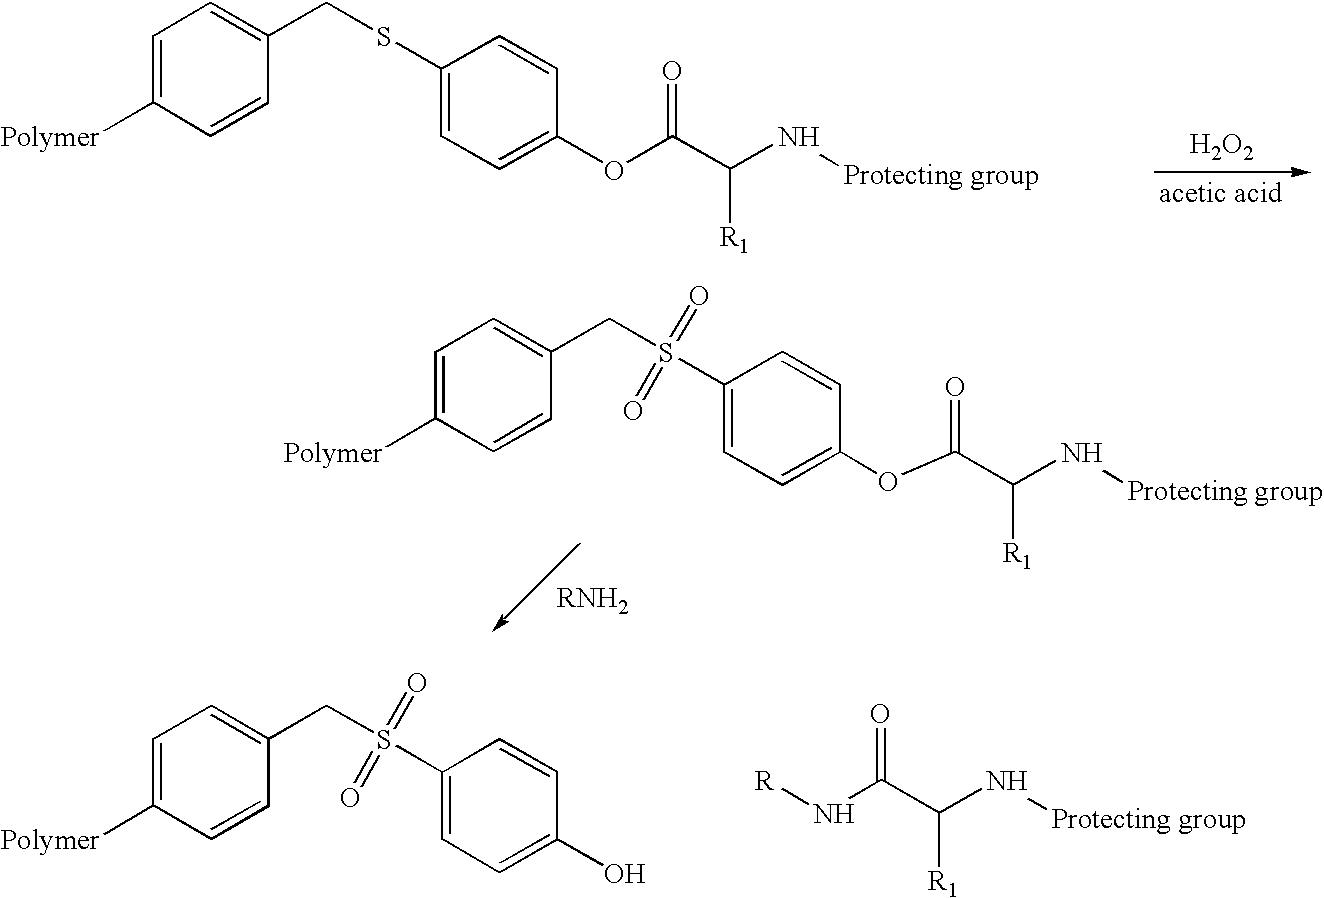 Cleavable thiocarbonate linkers for polynucleotide synthesis